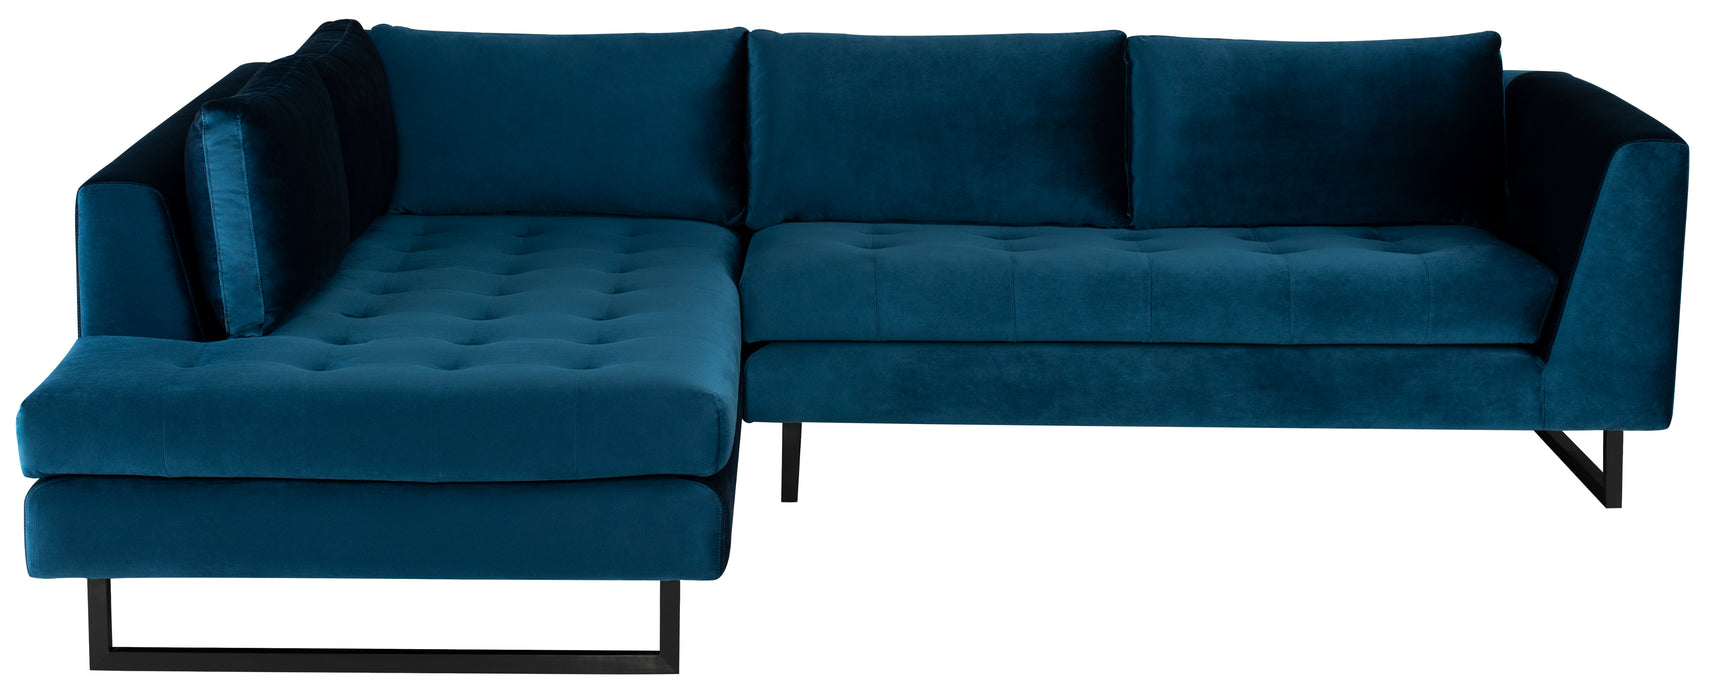 Janis NL Midnight Blue Sectional Sofa